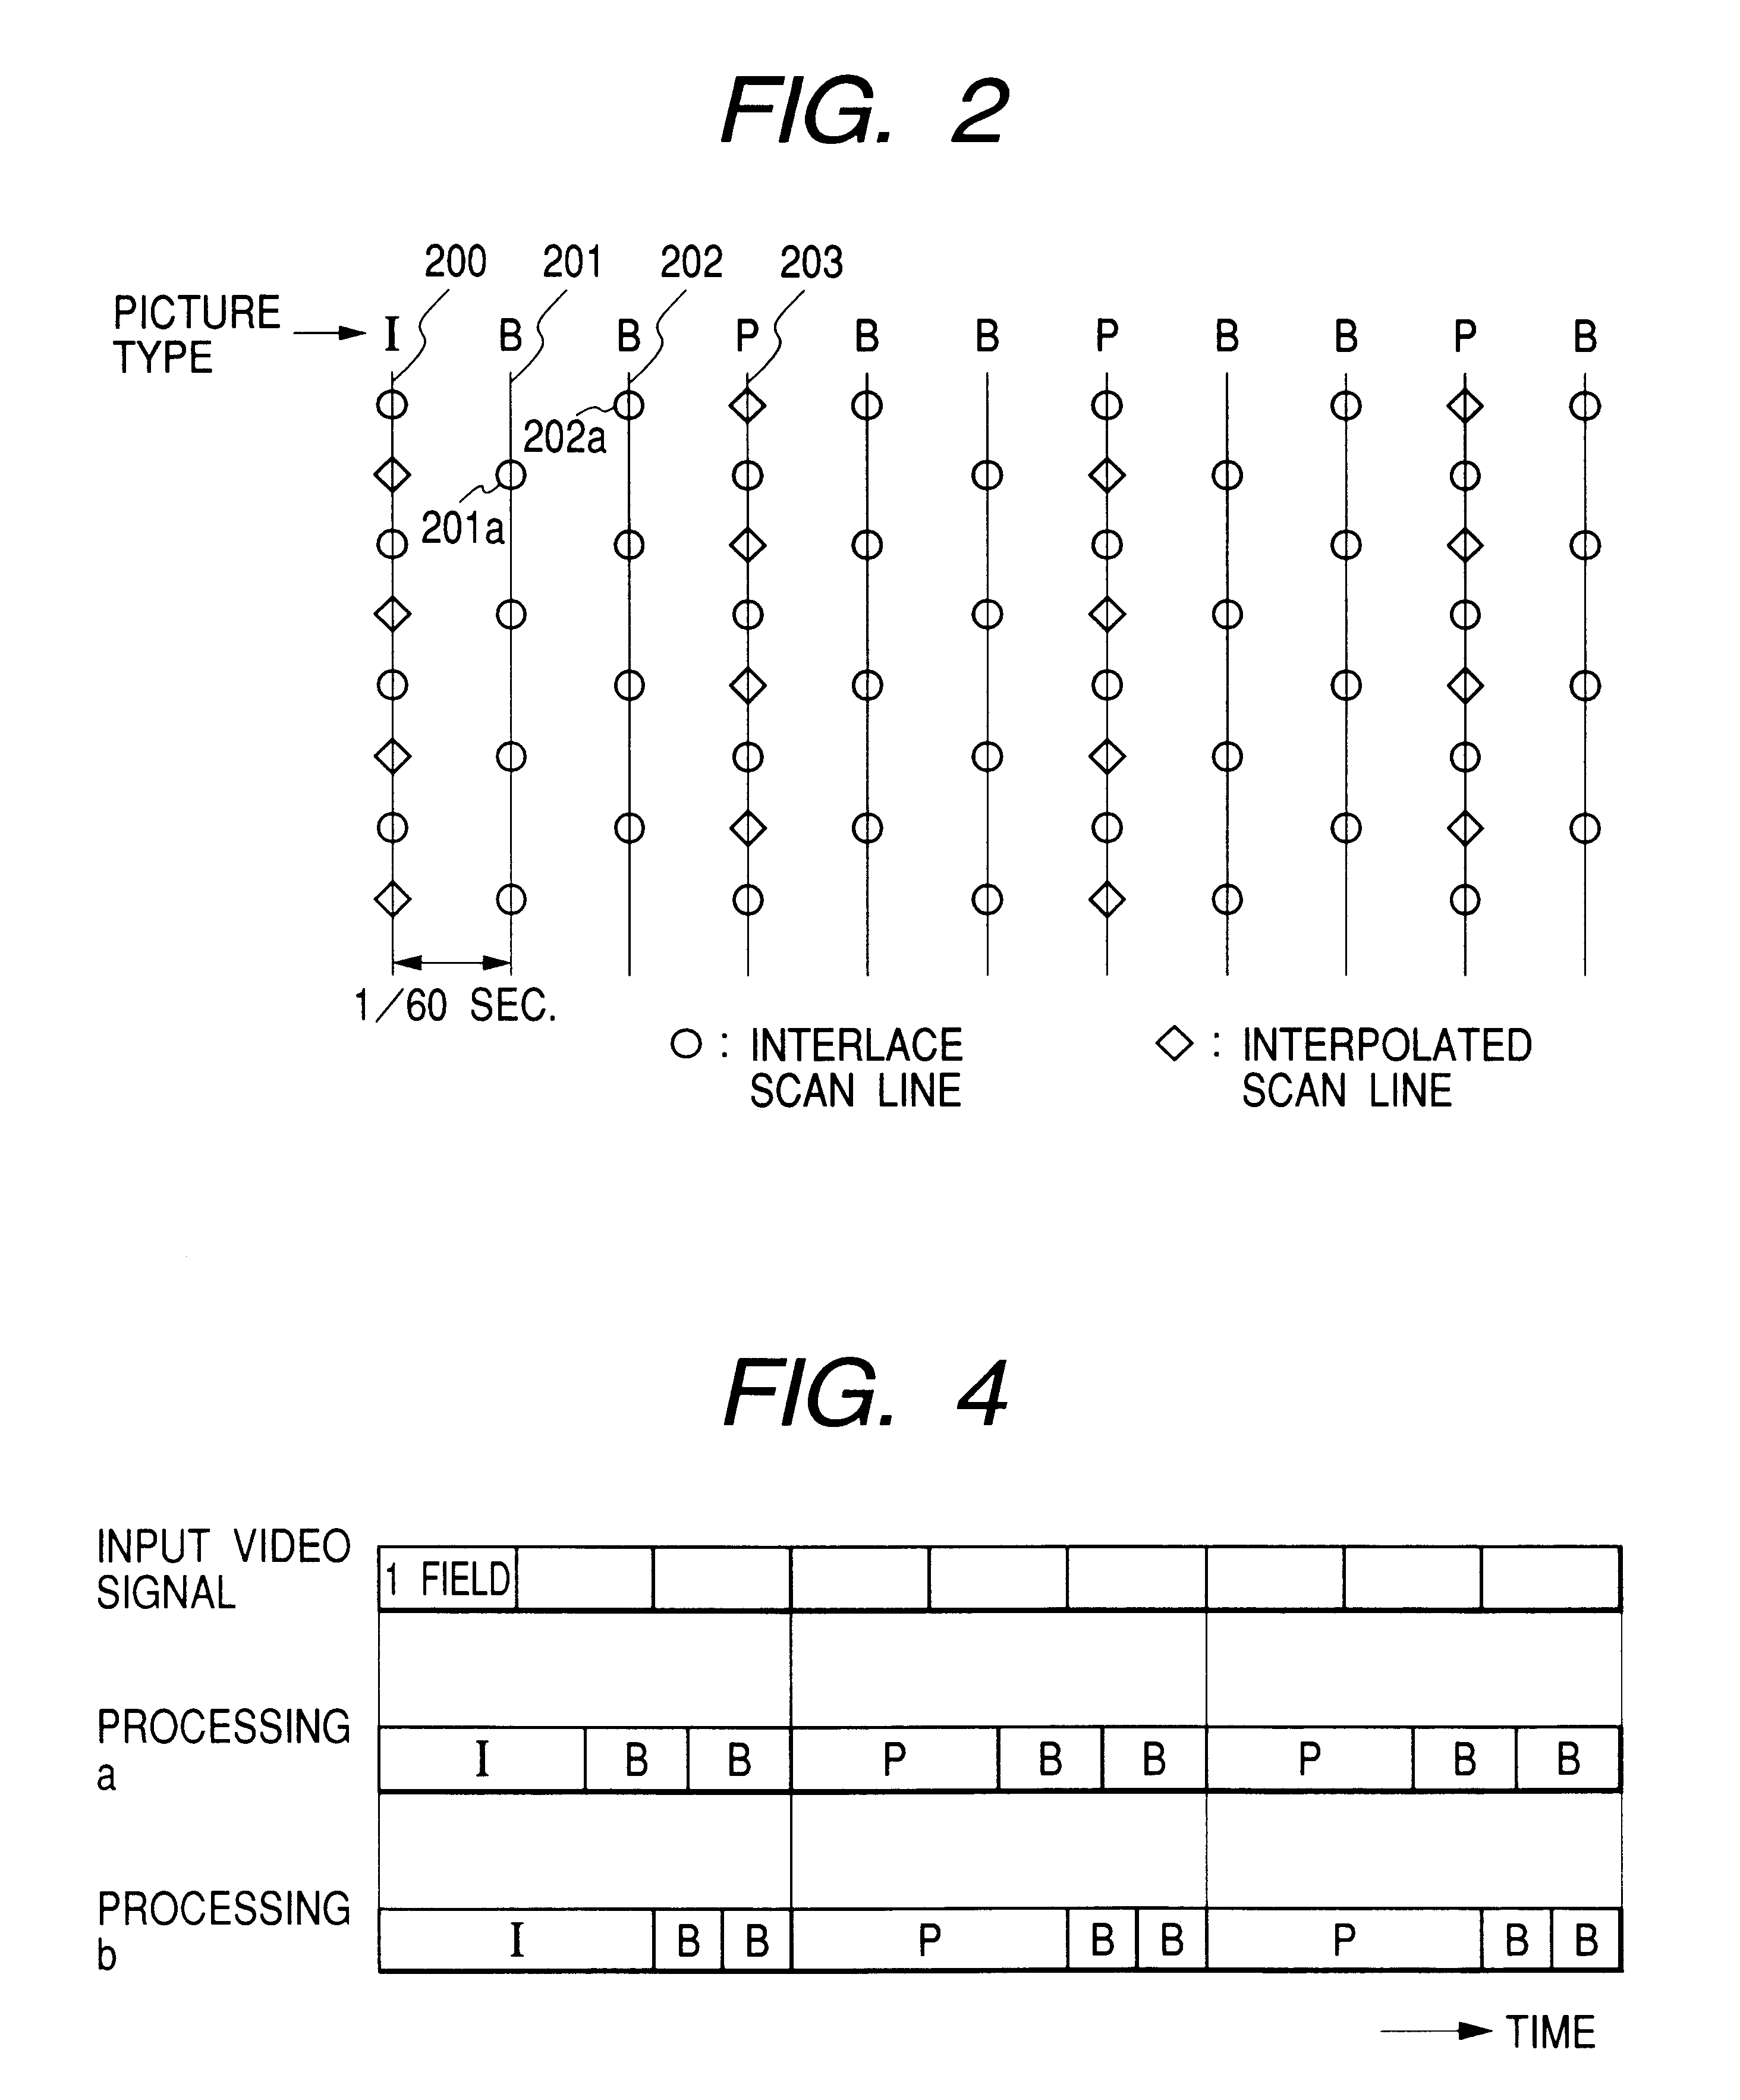 Interplaced video signal encoding and decoding method, and encoding apparatus and decoding apparatus utilizing the method, providing high efficiency of encoding by conversion of periodically selected fields to progressive scan frames which function as reference frames for predictive encoding